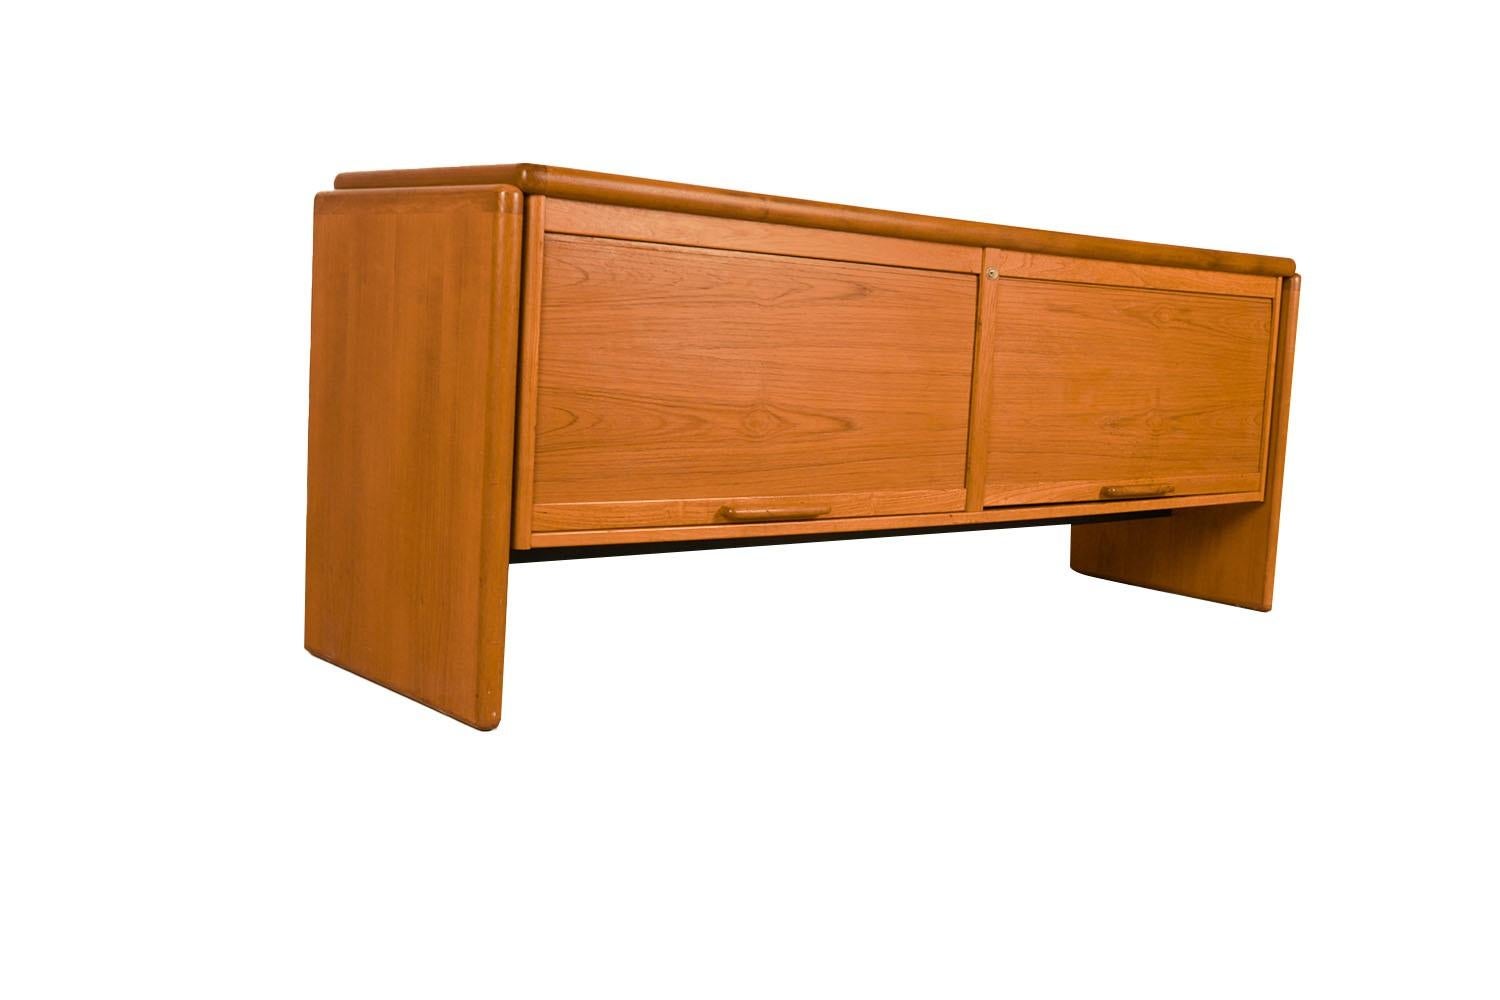 An exceptional teak file cabinet/credenza, circa 1970’s, made in Denmark, by Dyrlund. This absolutely stunning piece features two sliding Vertical Tambour Doors that open to reveal a finished interior with a large sliding file deep drawer on the